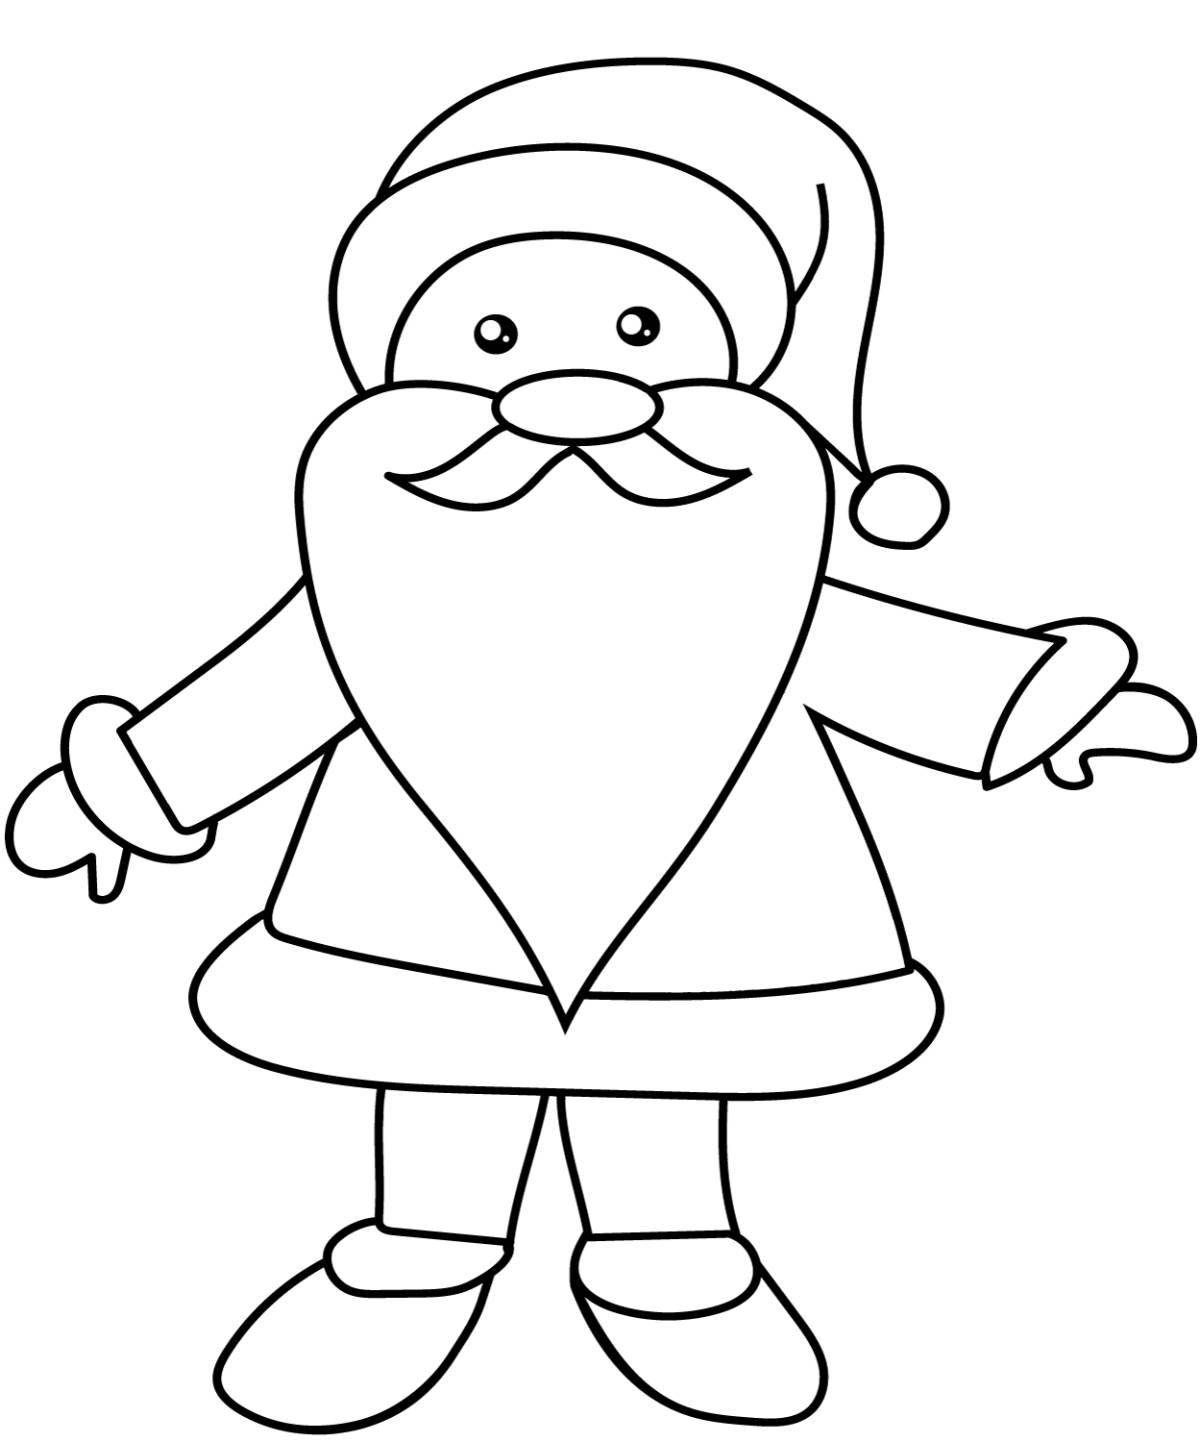 Glowing santa claus coloring page for kids 2-3 years old